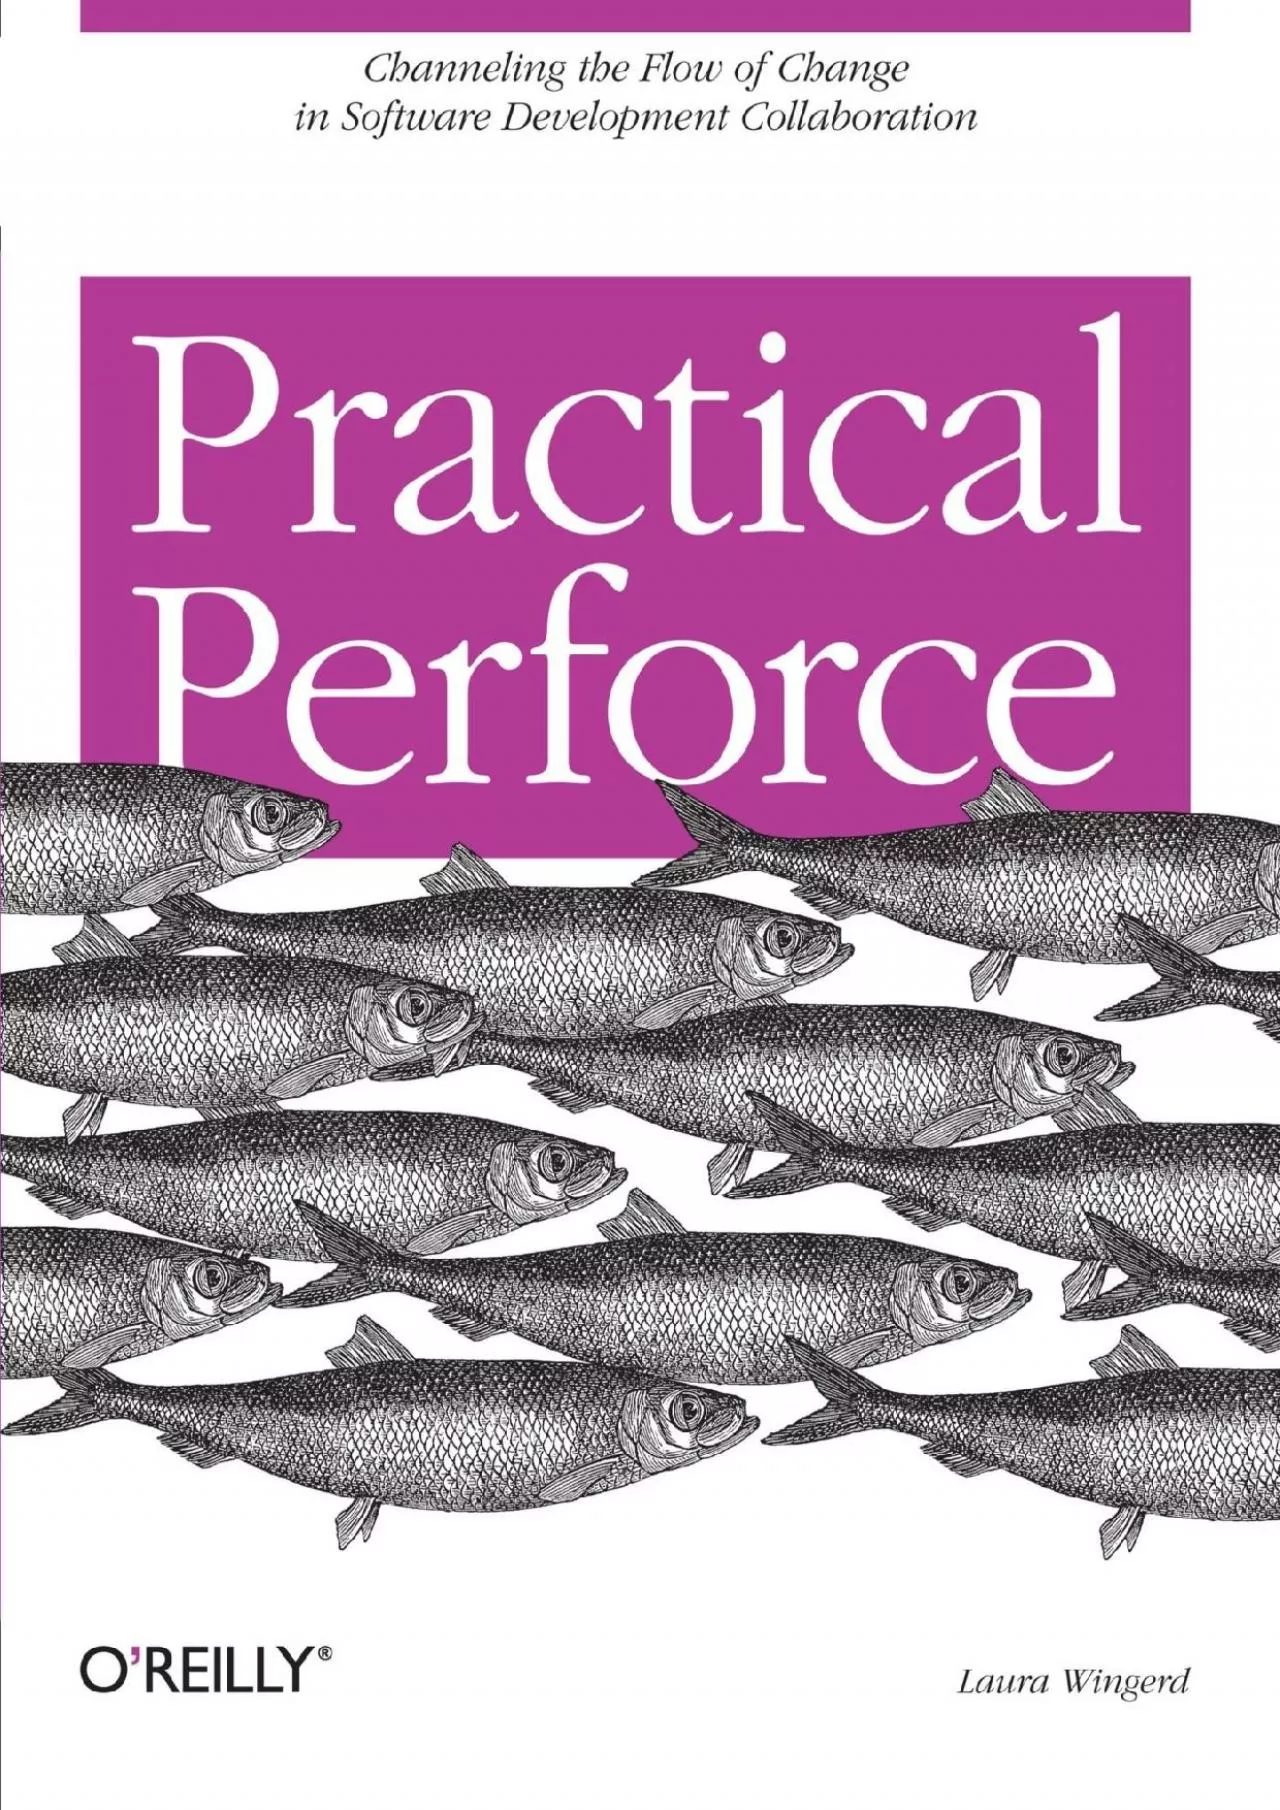 [READING BOOK]-Practical Perforce: Channeling the Flow of Change in Software Development